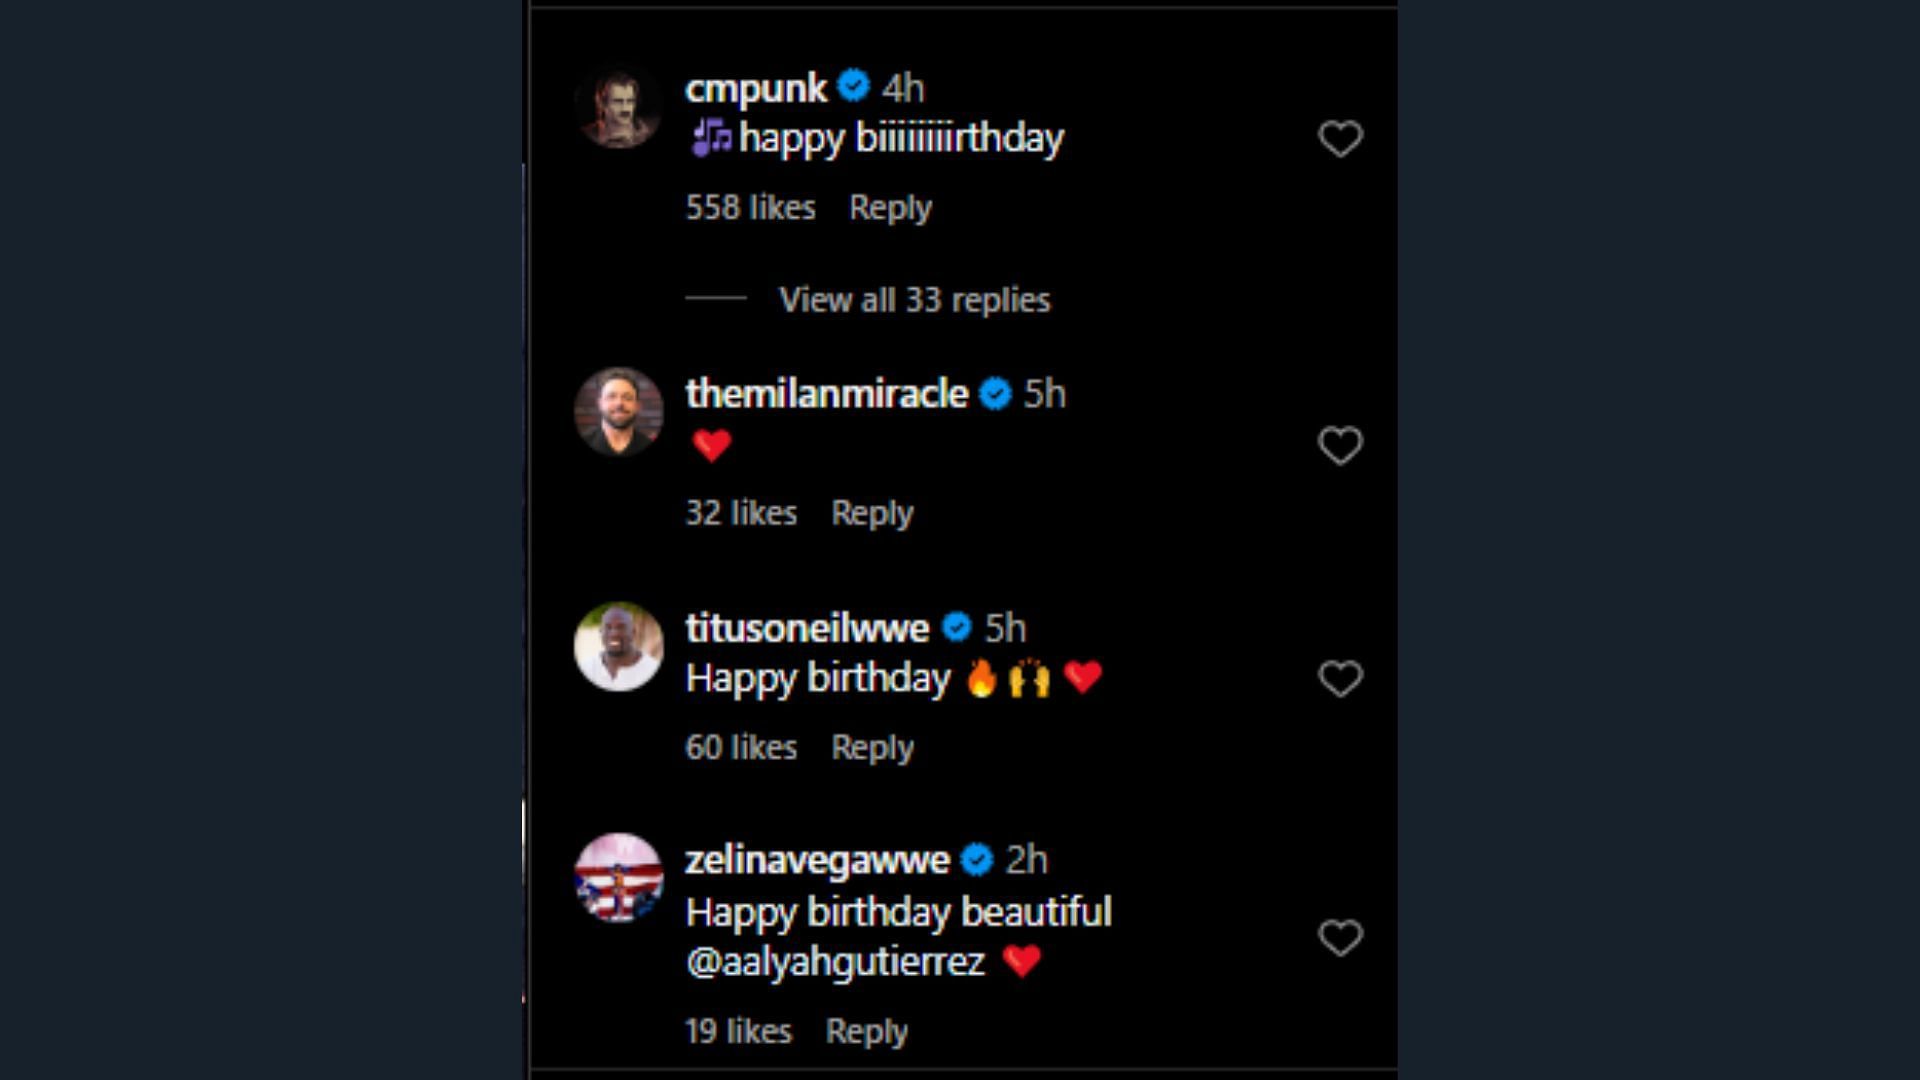 The stars all wished the young Mysterio a happy birthday